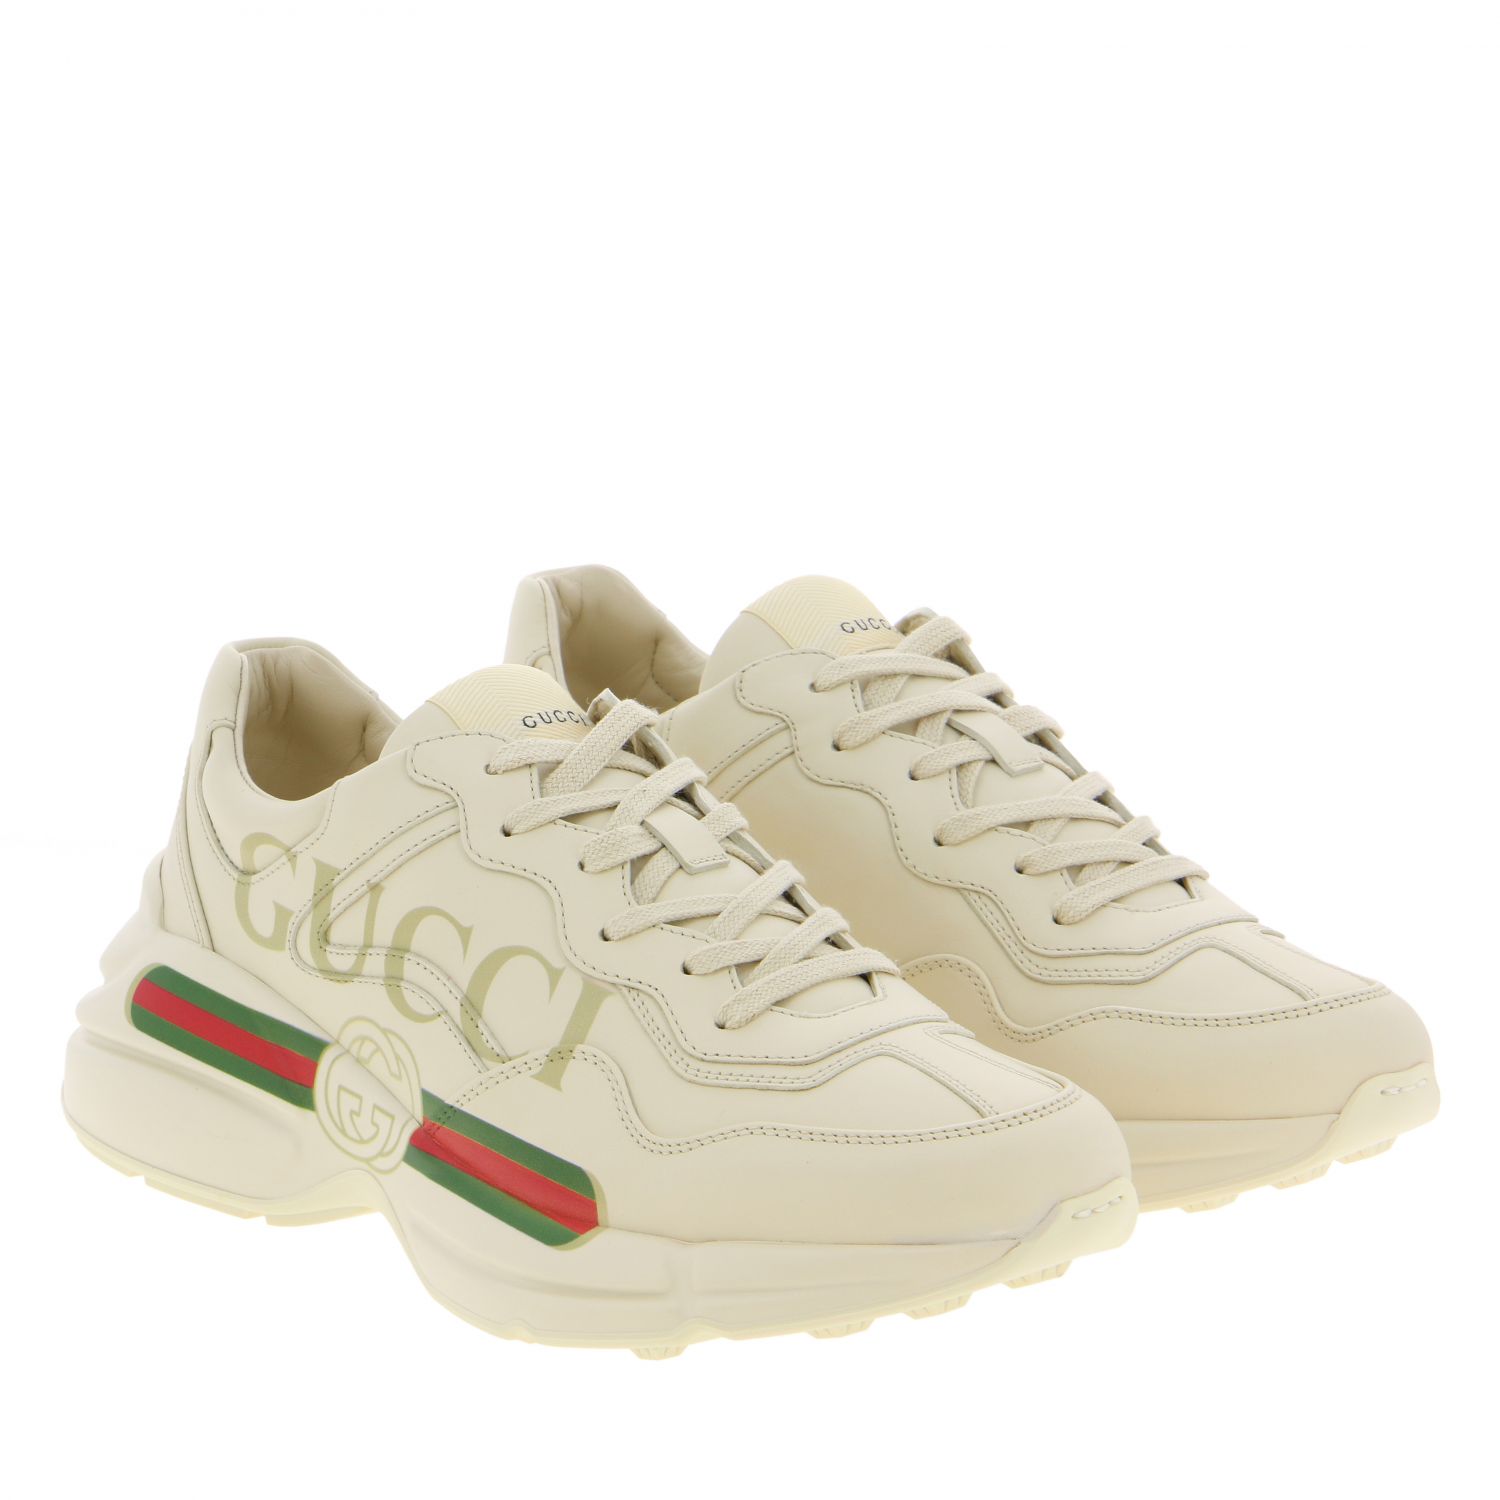 GUCCI: Rhyton leather sneakers with maxi logo print | Sneakers Gucci ...